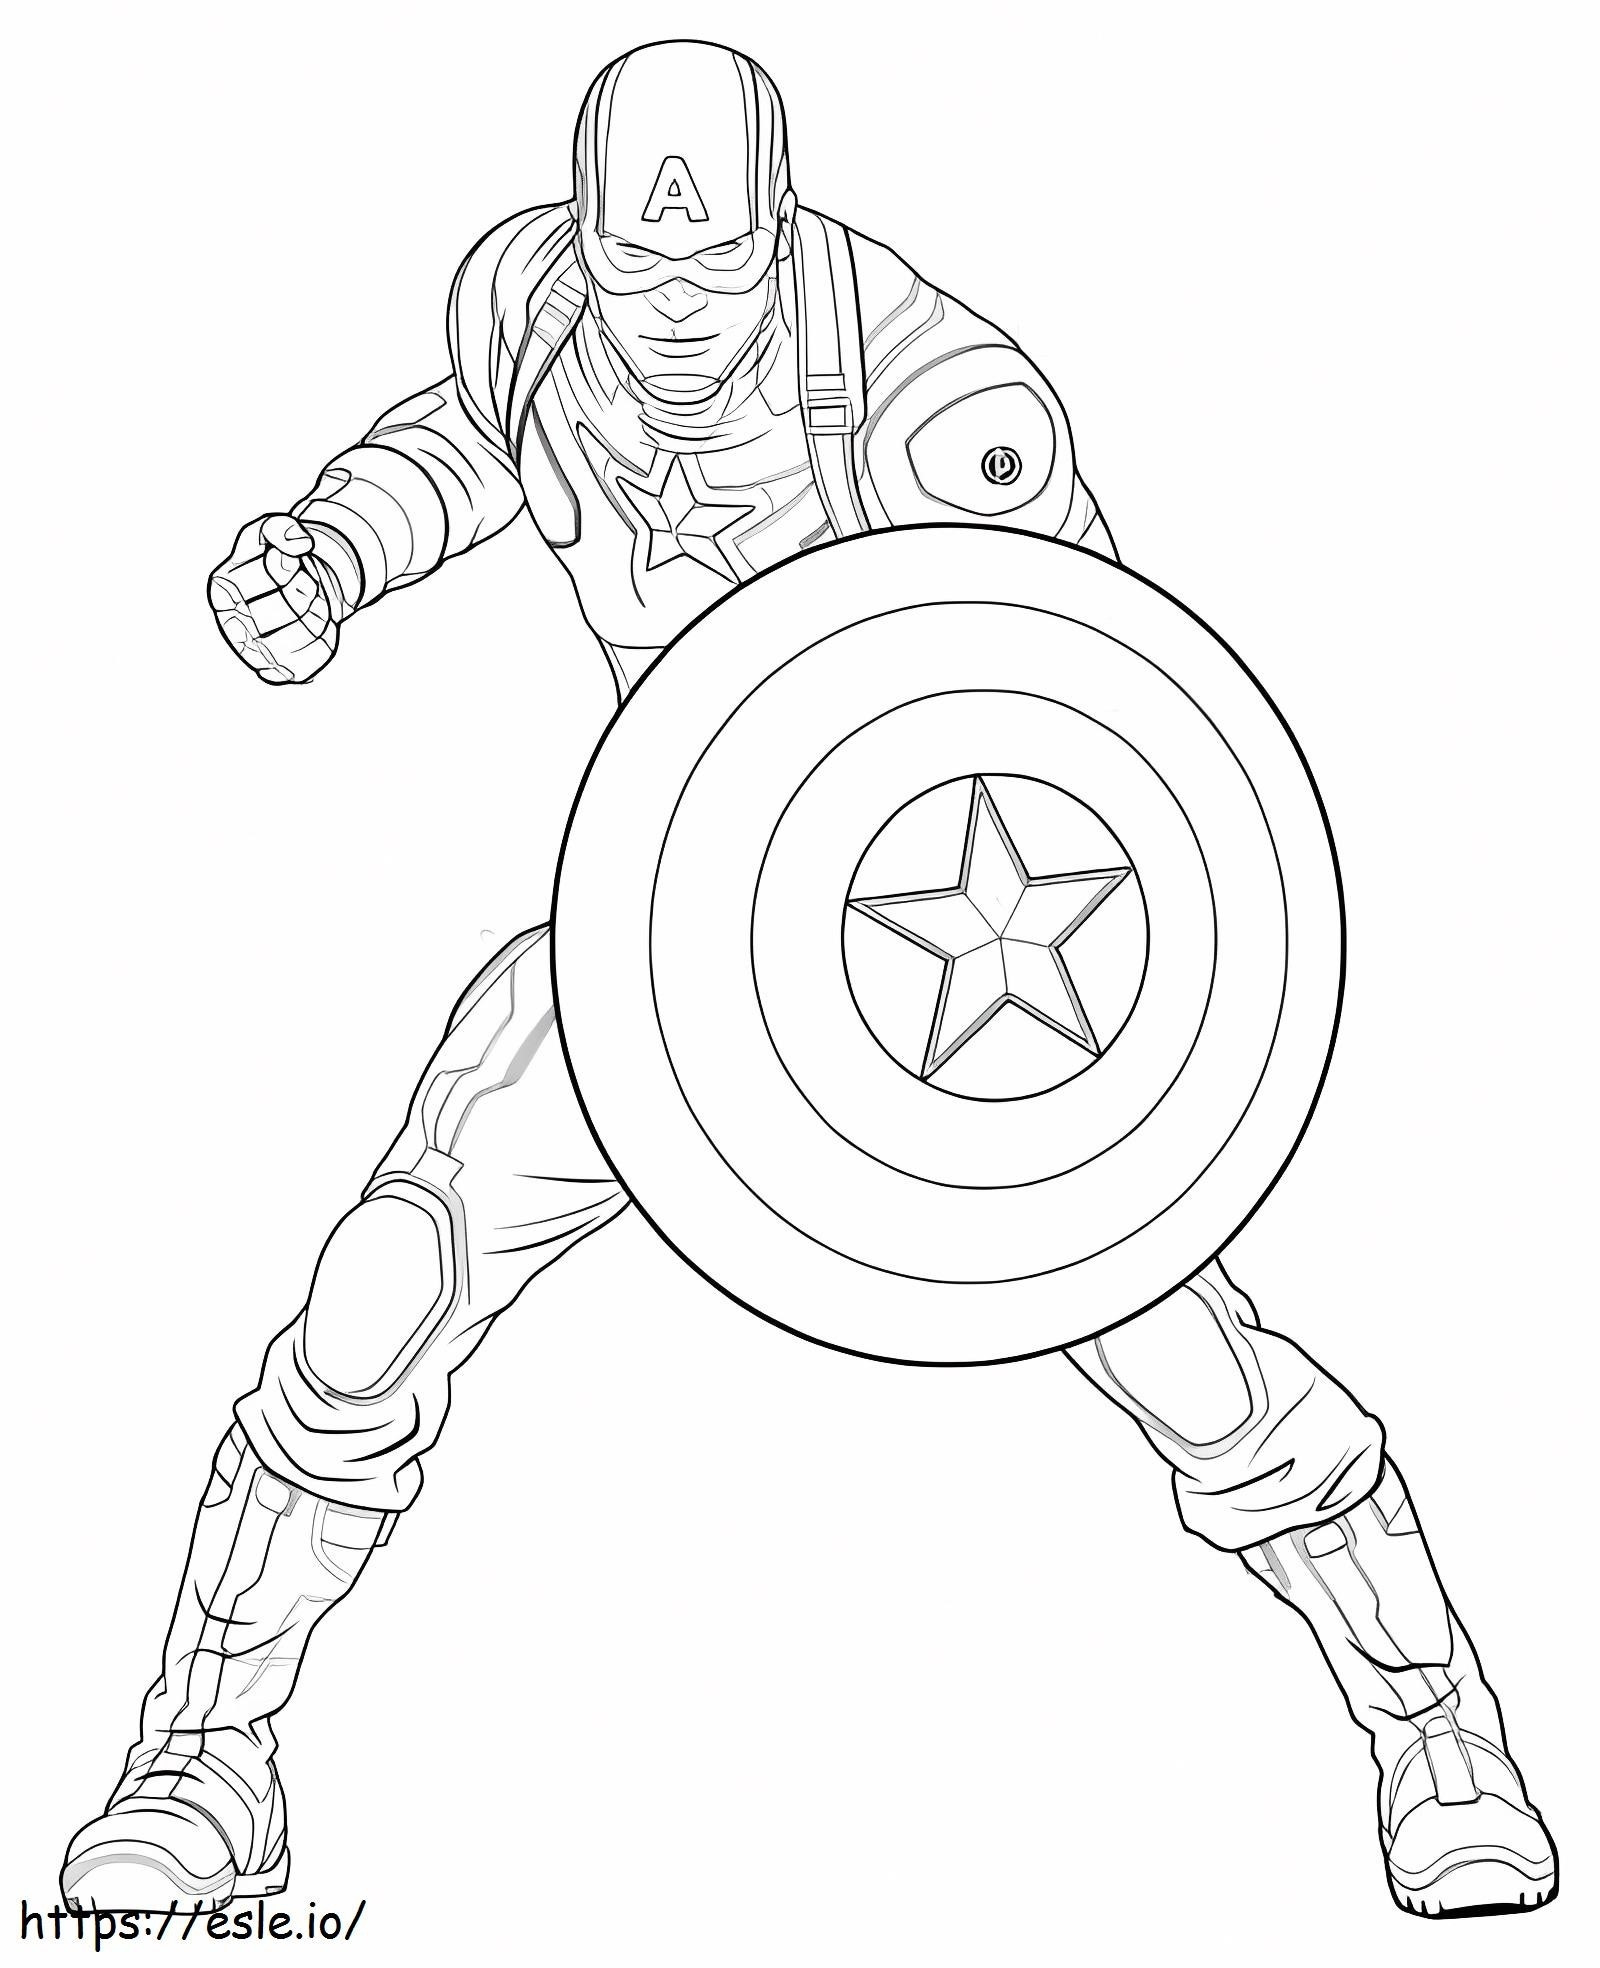 Captain America Fighting coloring page